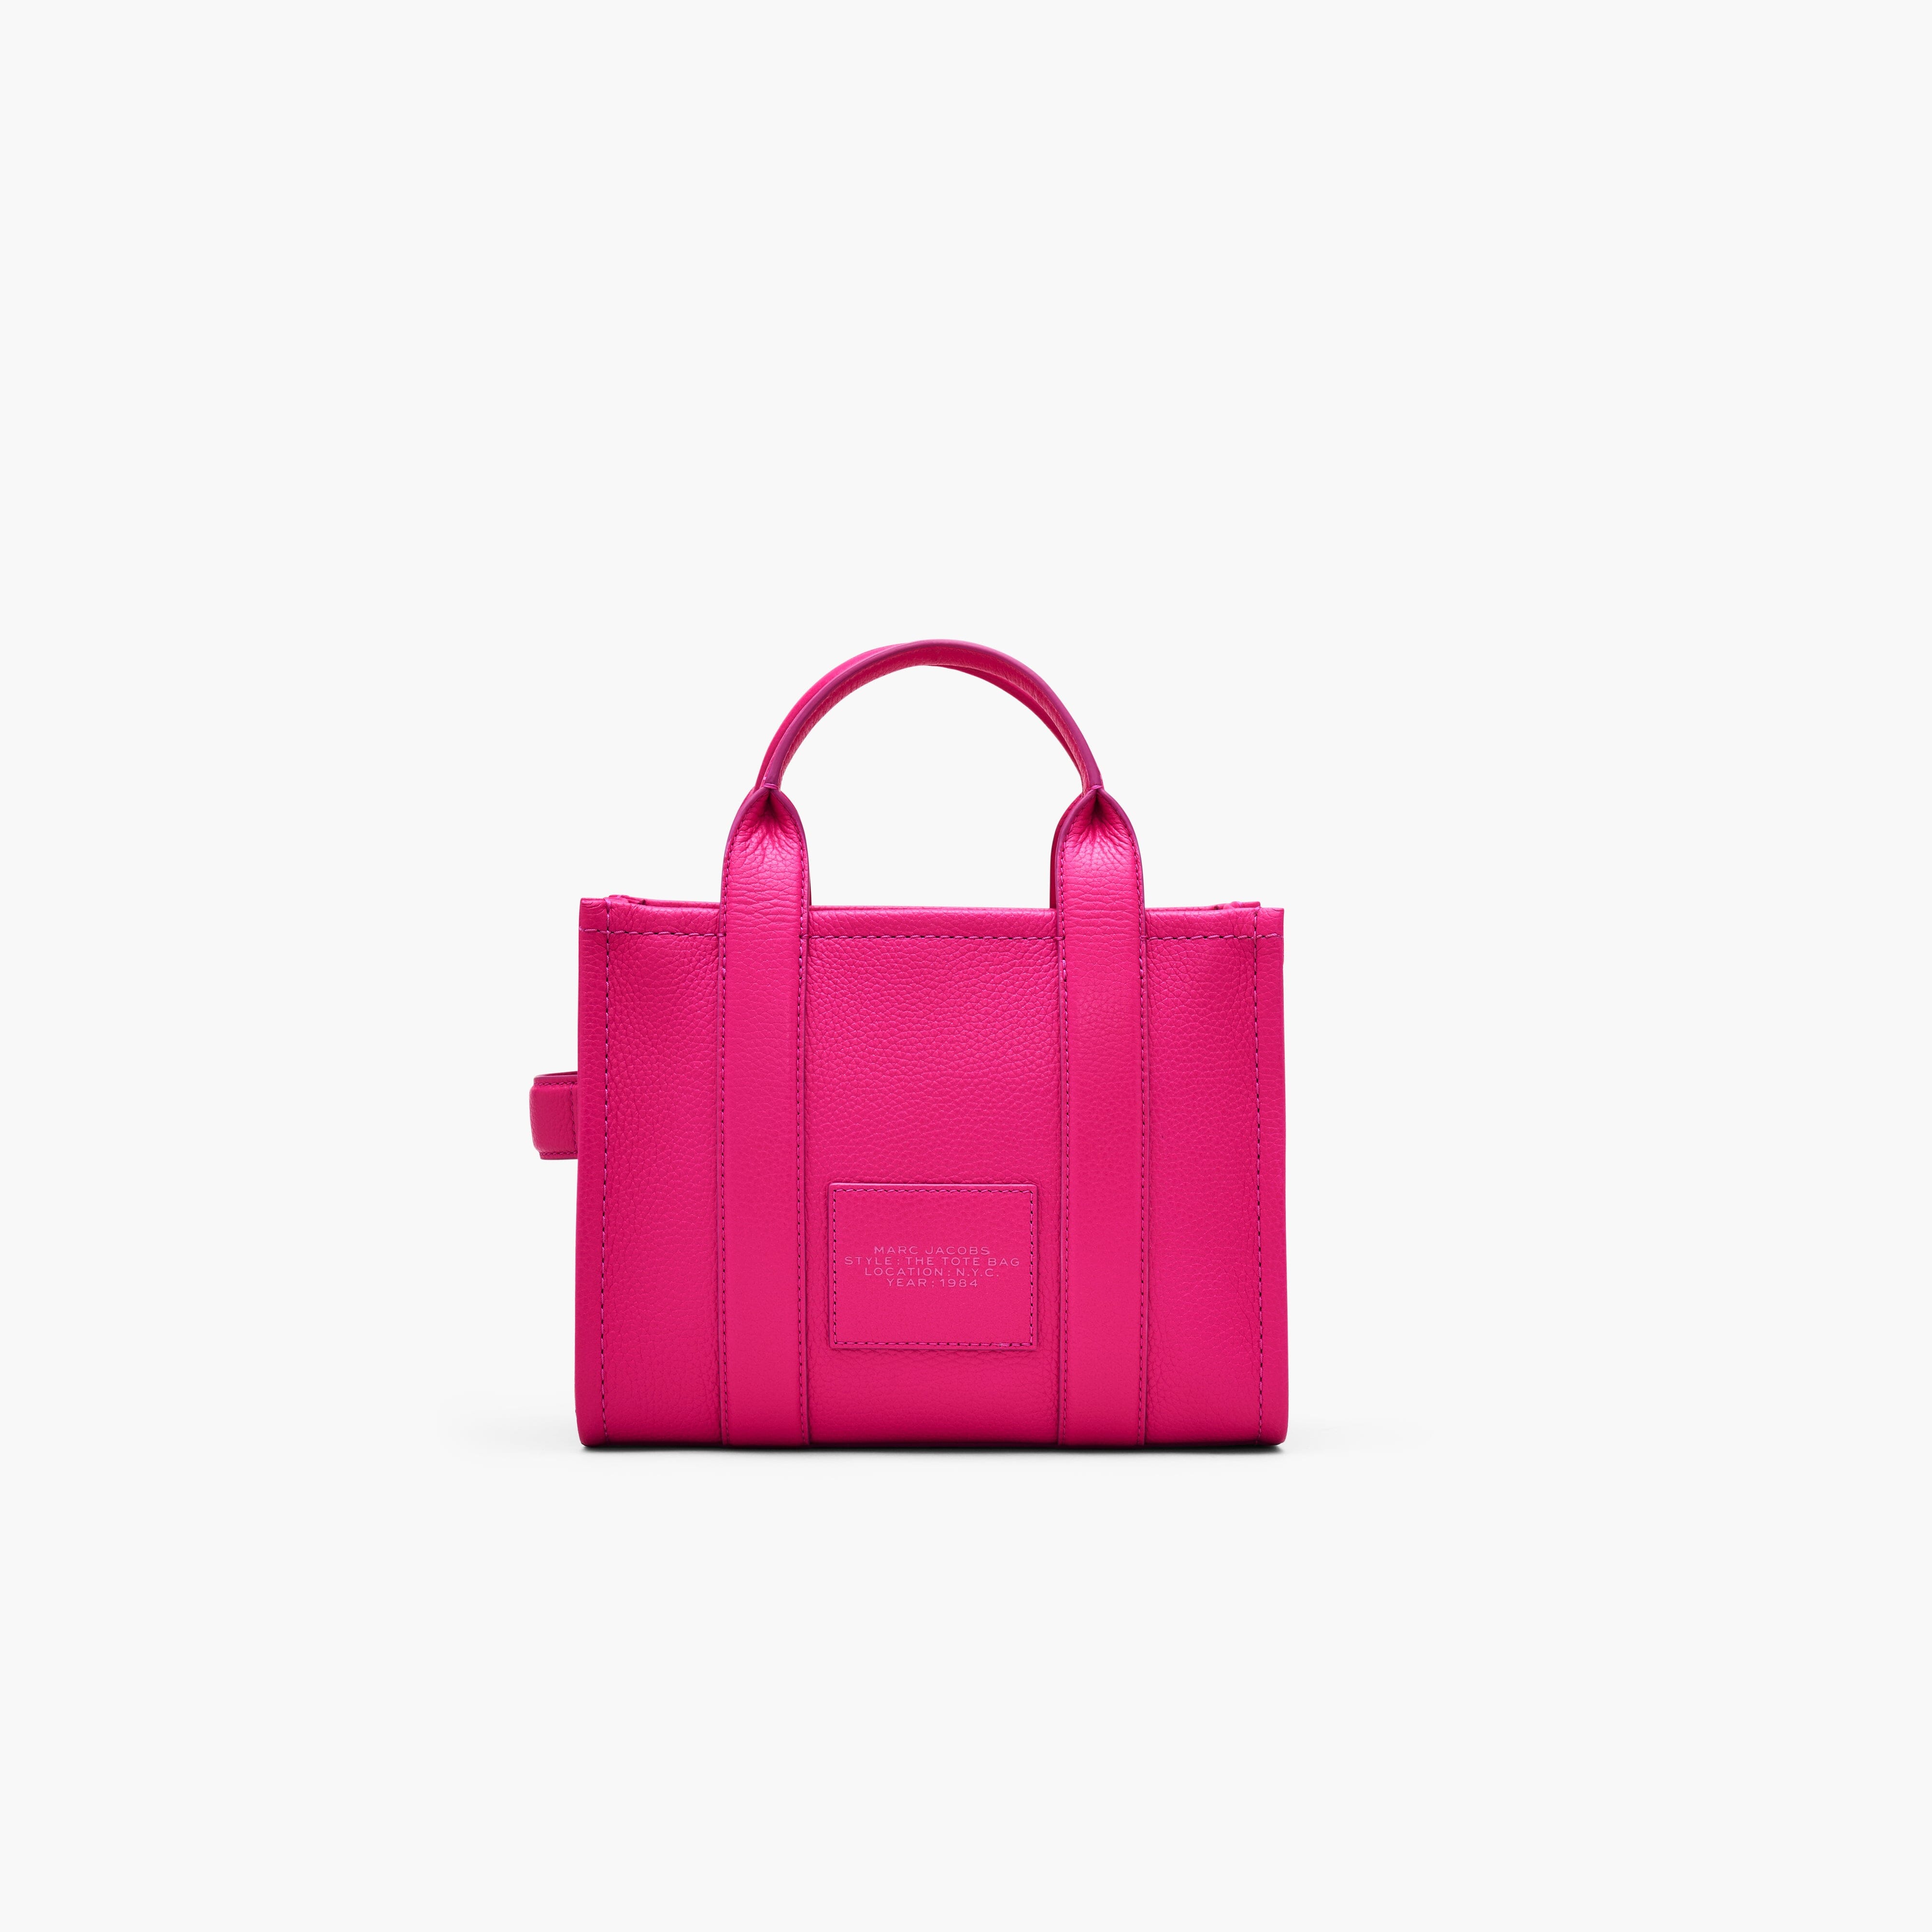 MARC JACOBS - H009L01SP21-665 - The Leather Small Tote Bag - Hot Pink Borse Marc Jacobs 